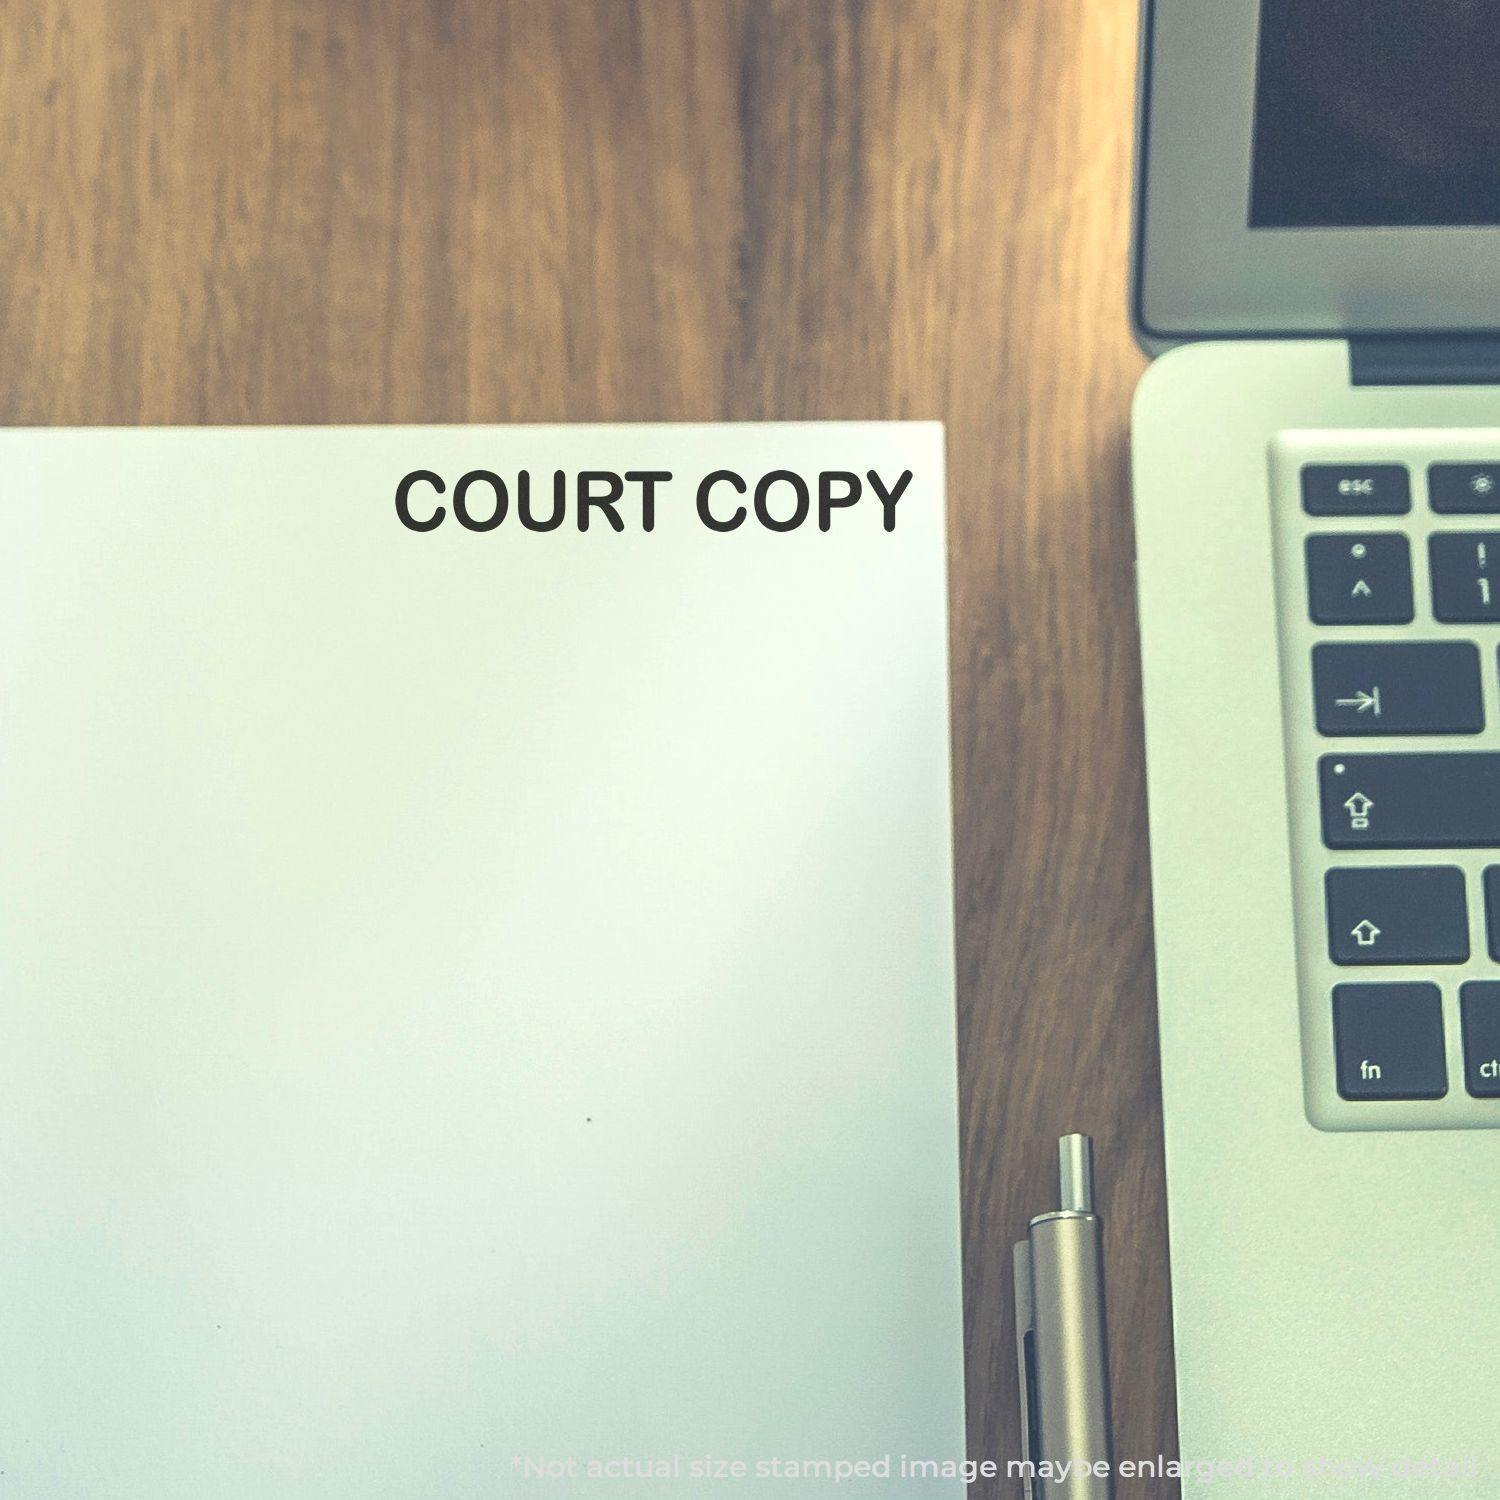 A stock office legal rubber stamp with a stamped image showing how the text "COURT COPY" is displayed after stamping.